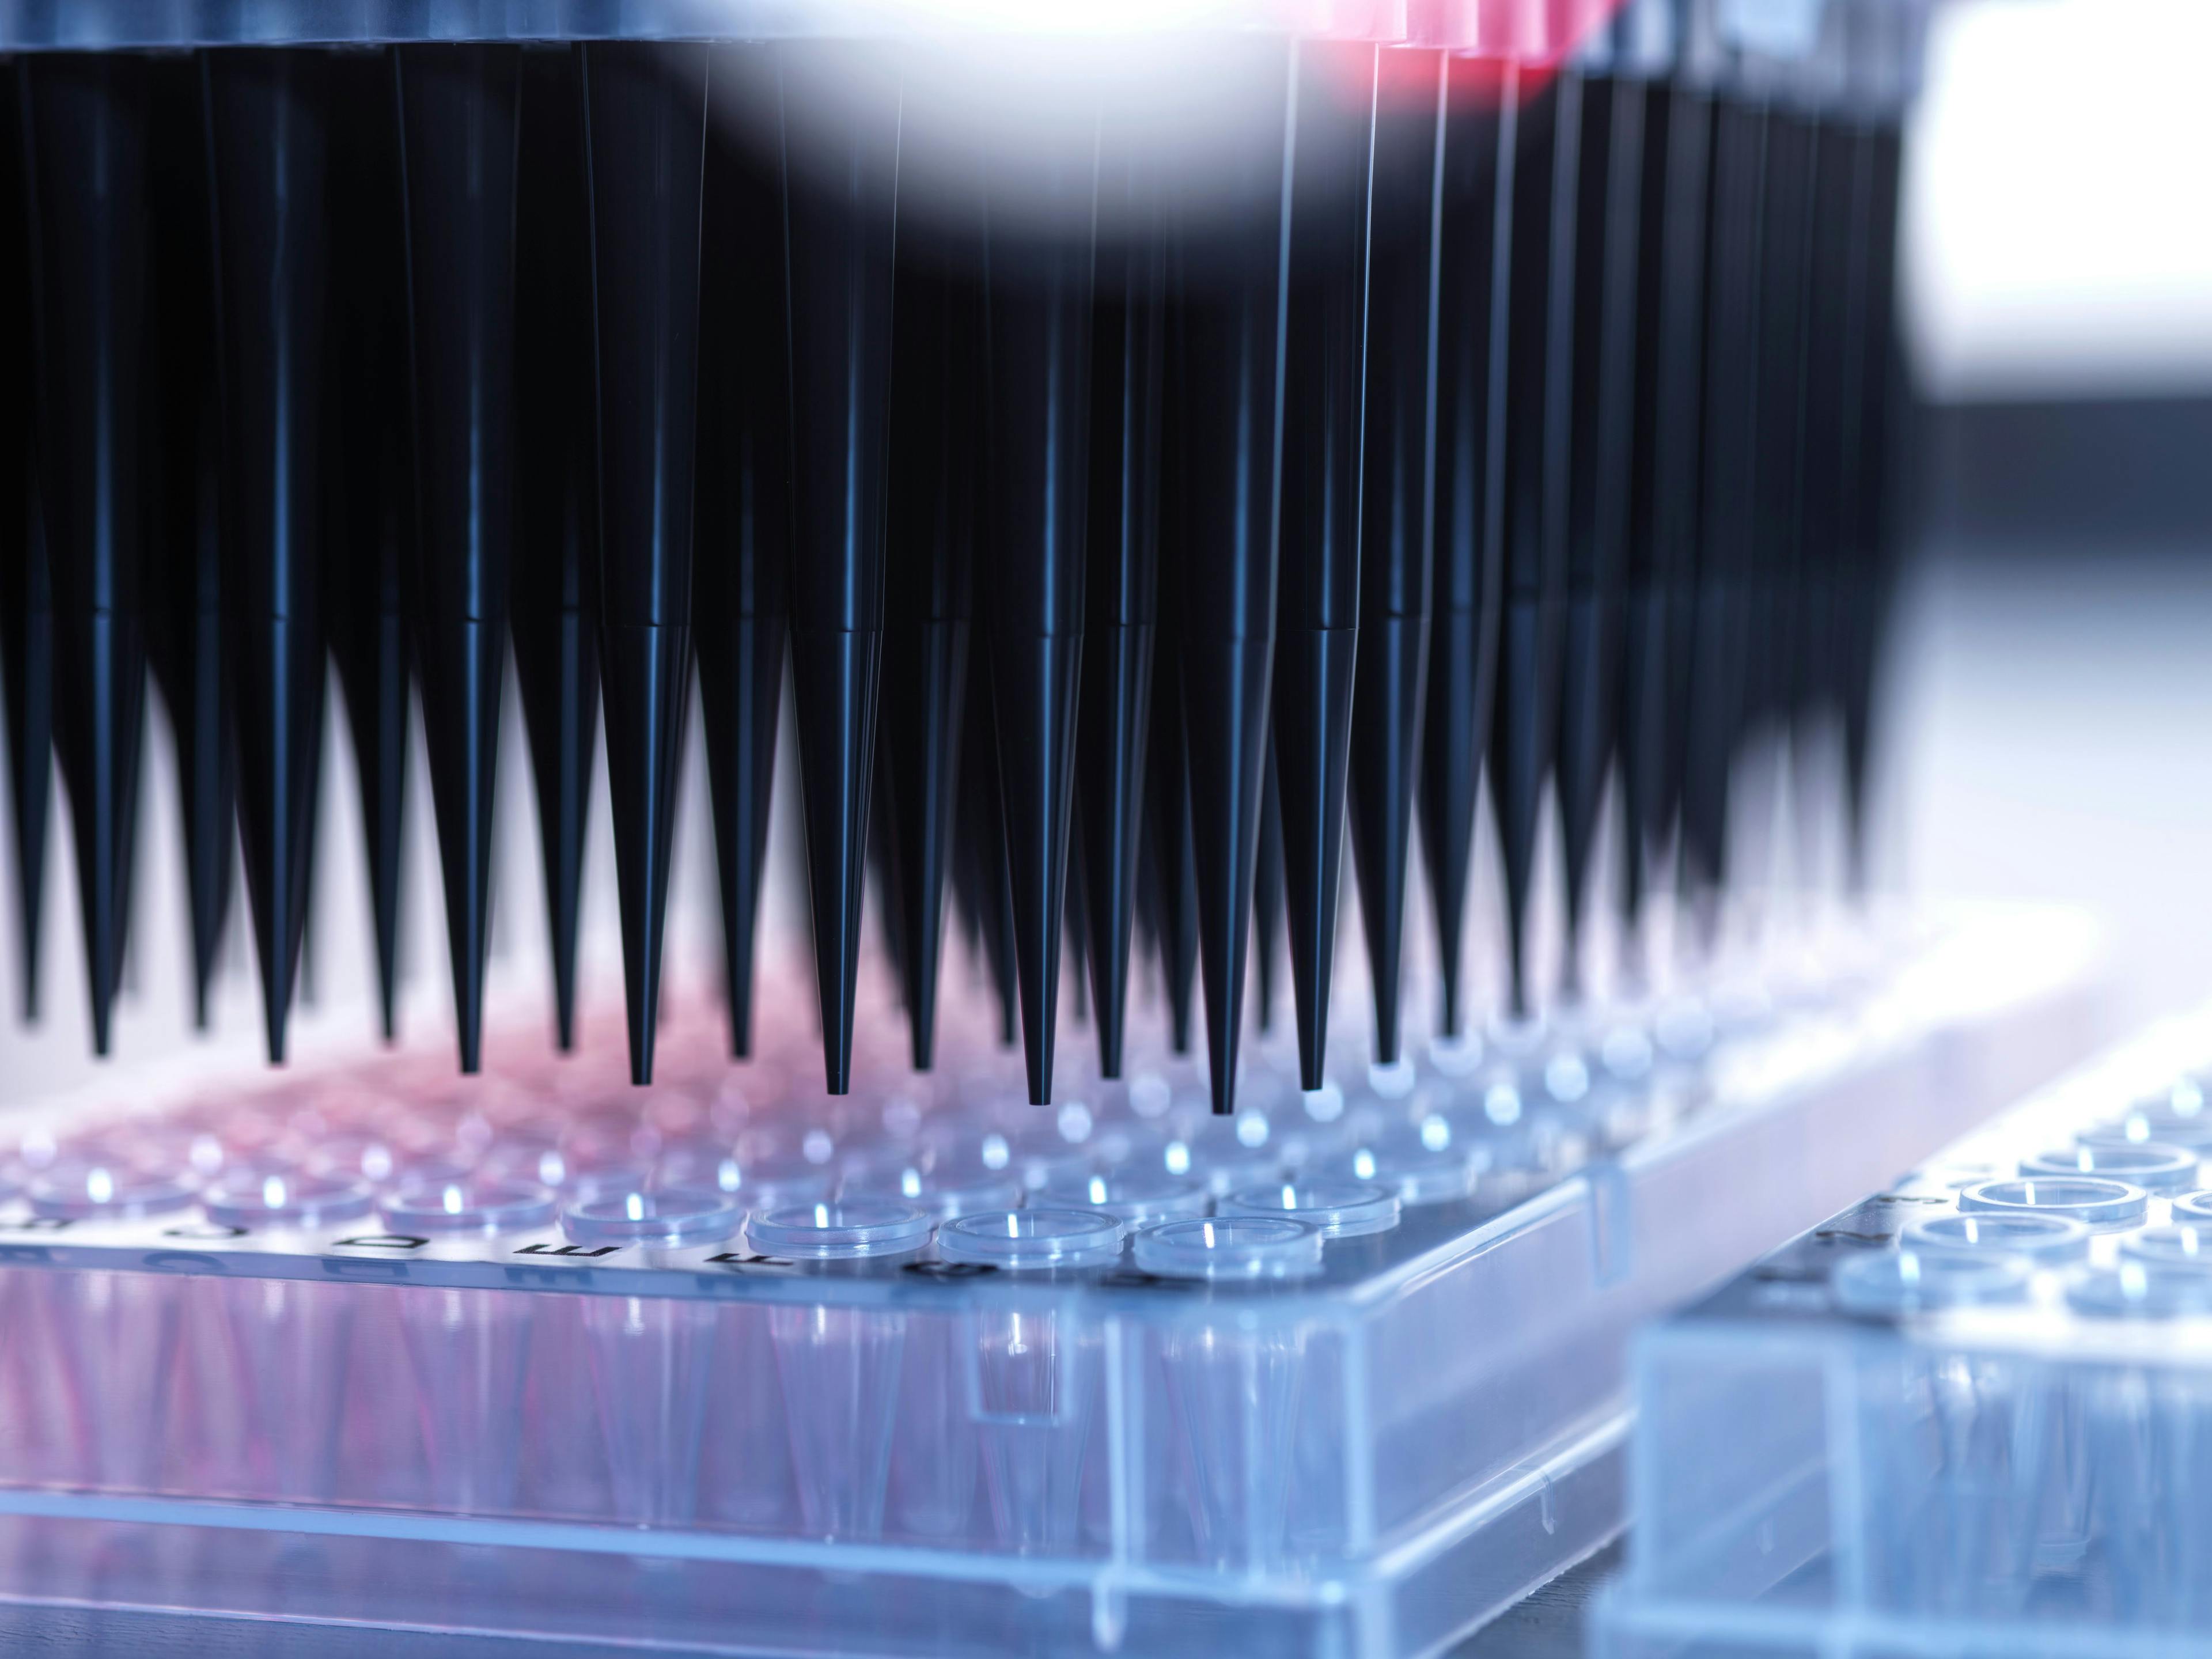 Samples being pipetted into micro plates during automated analysis in lab | Image Credit: © Image Source - stock.adobe.com